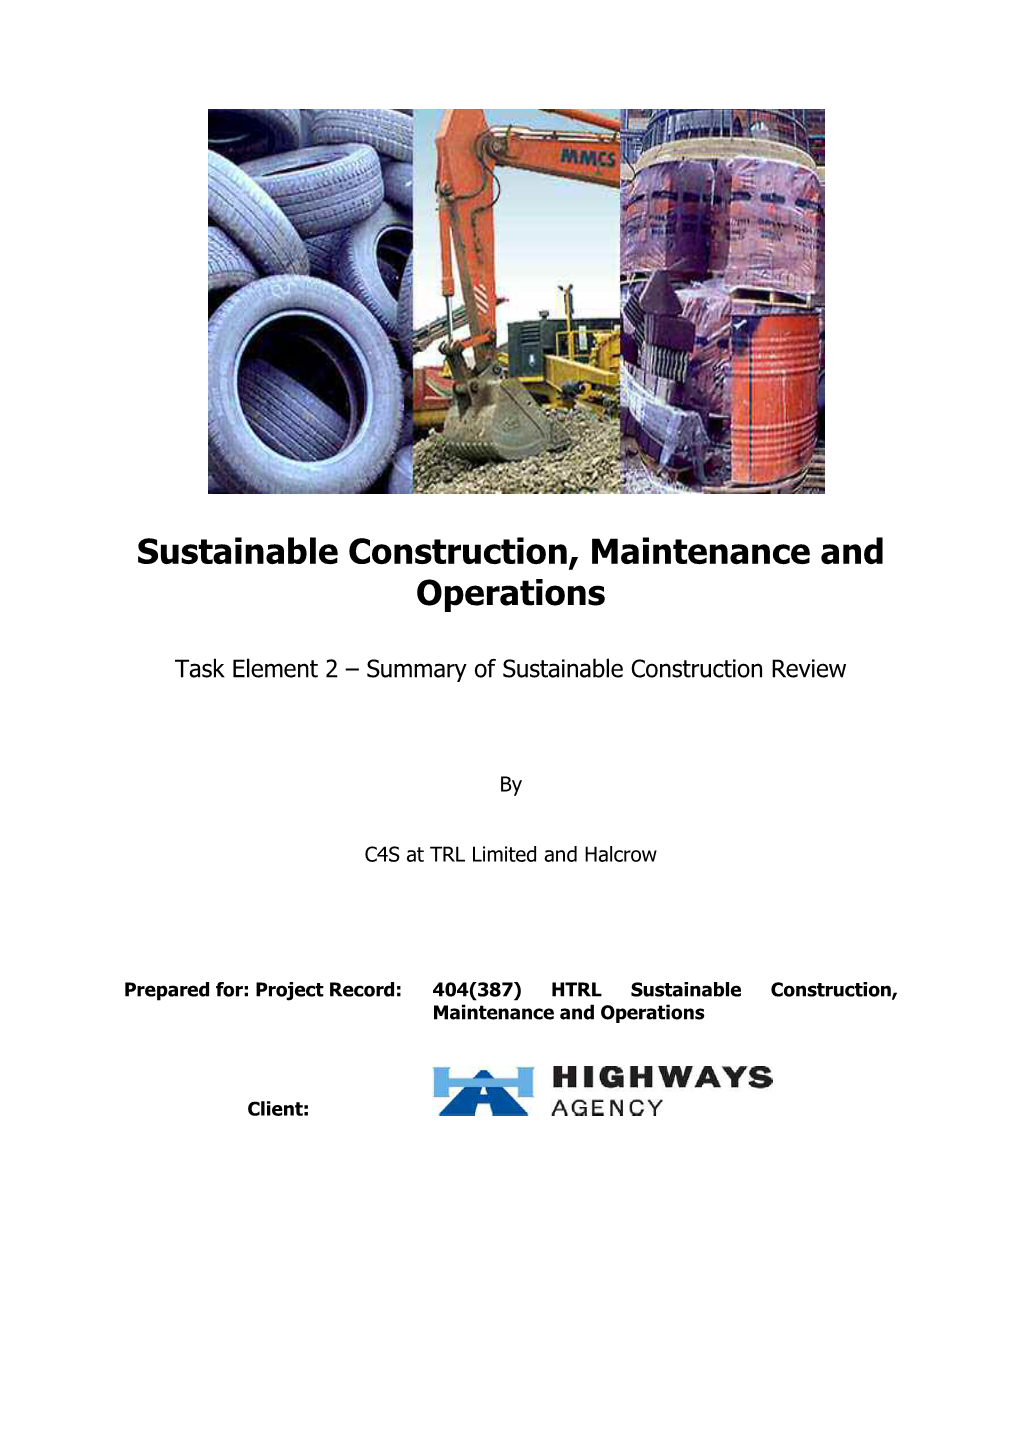 Sustainable Construction, Maintenance and Operations